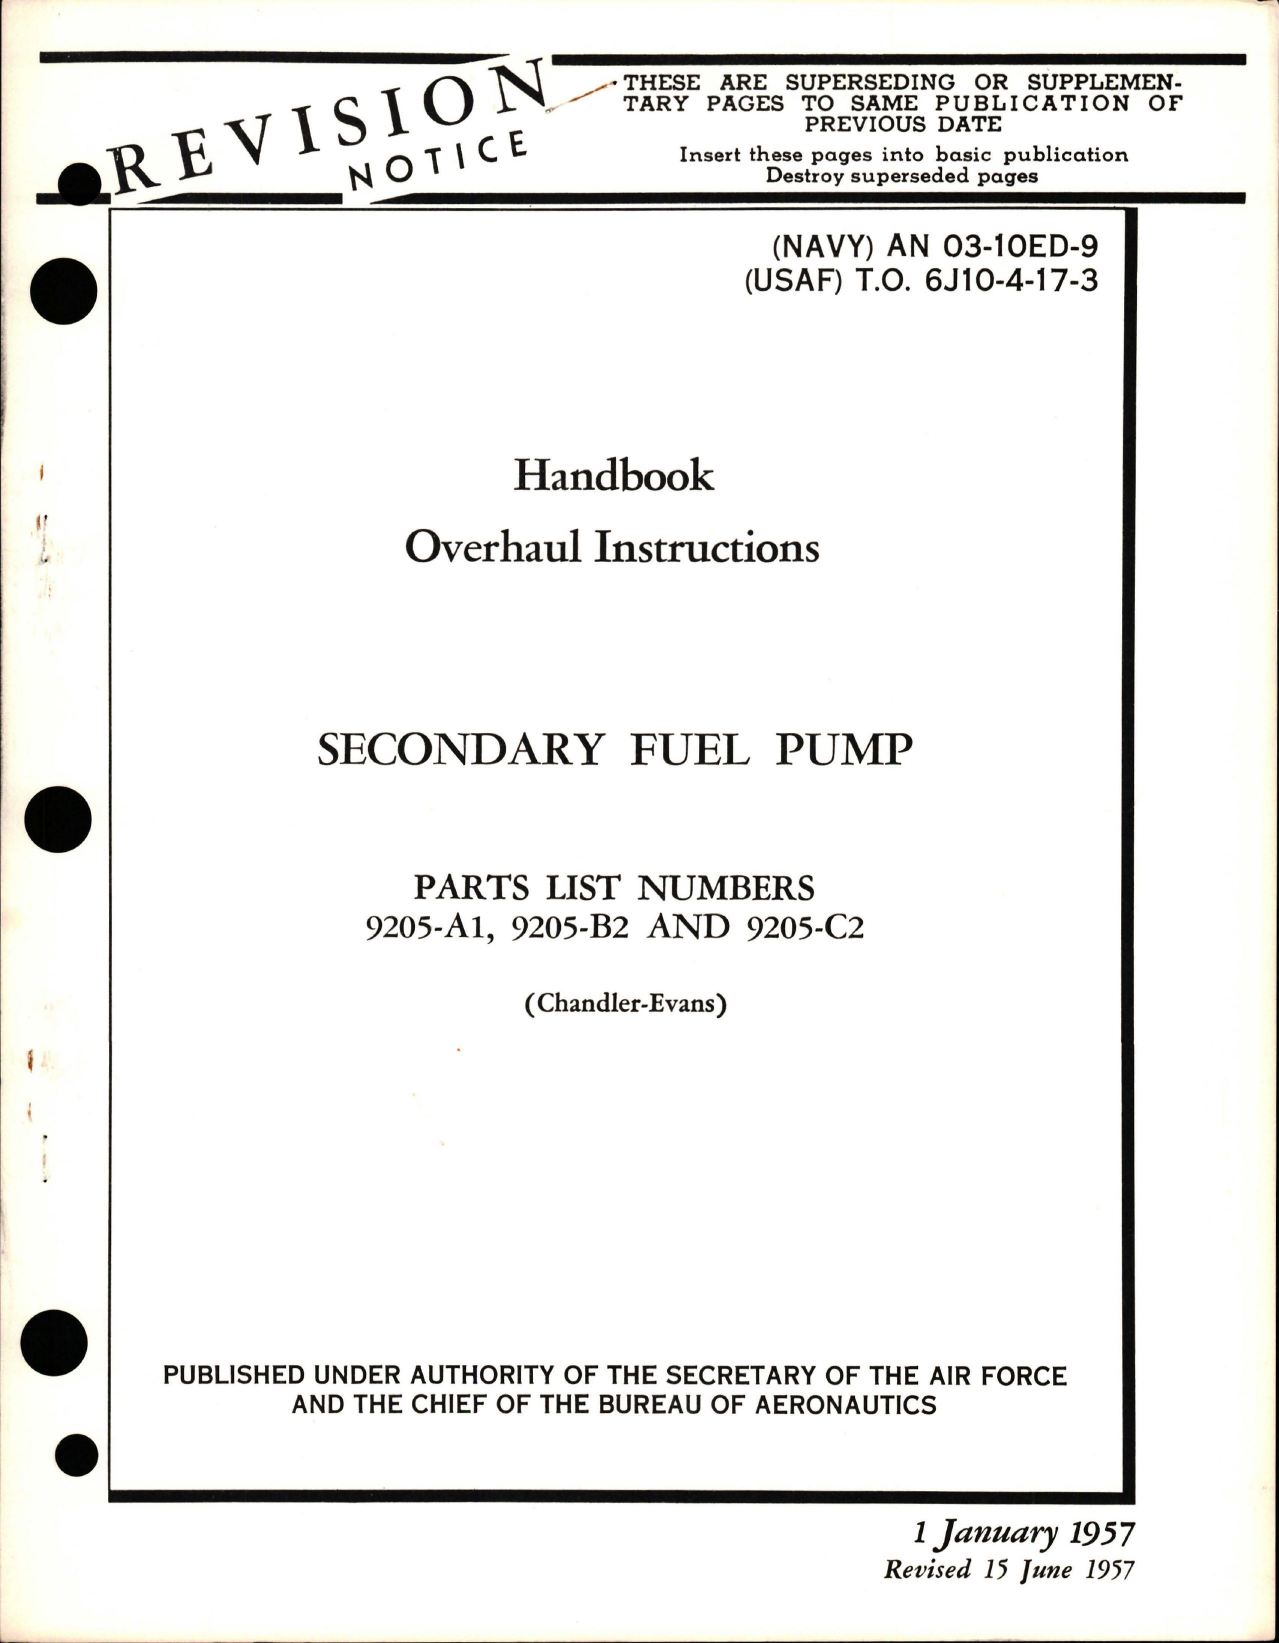 Sample page 1 from AirCorps Library document: Overhaul Instructions for Secondary Fuel Pump - Parts 9205-A1, 9205-B2, and 9205-C2